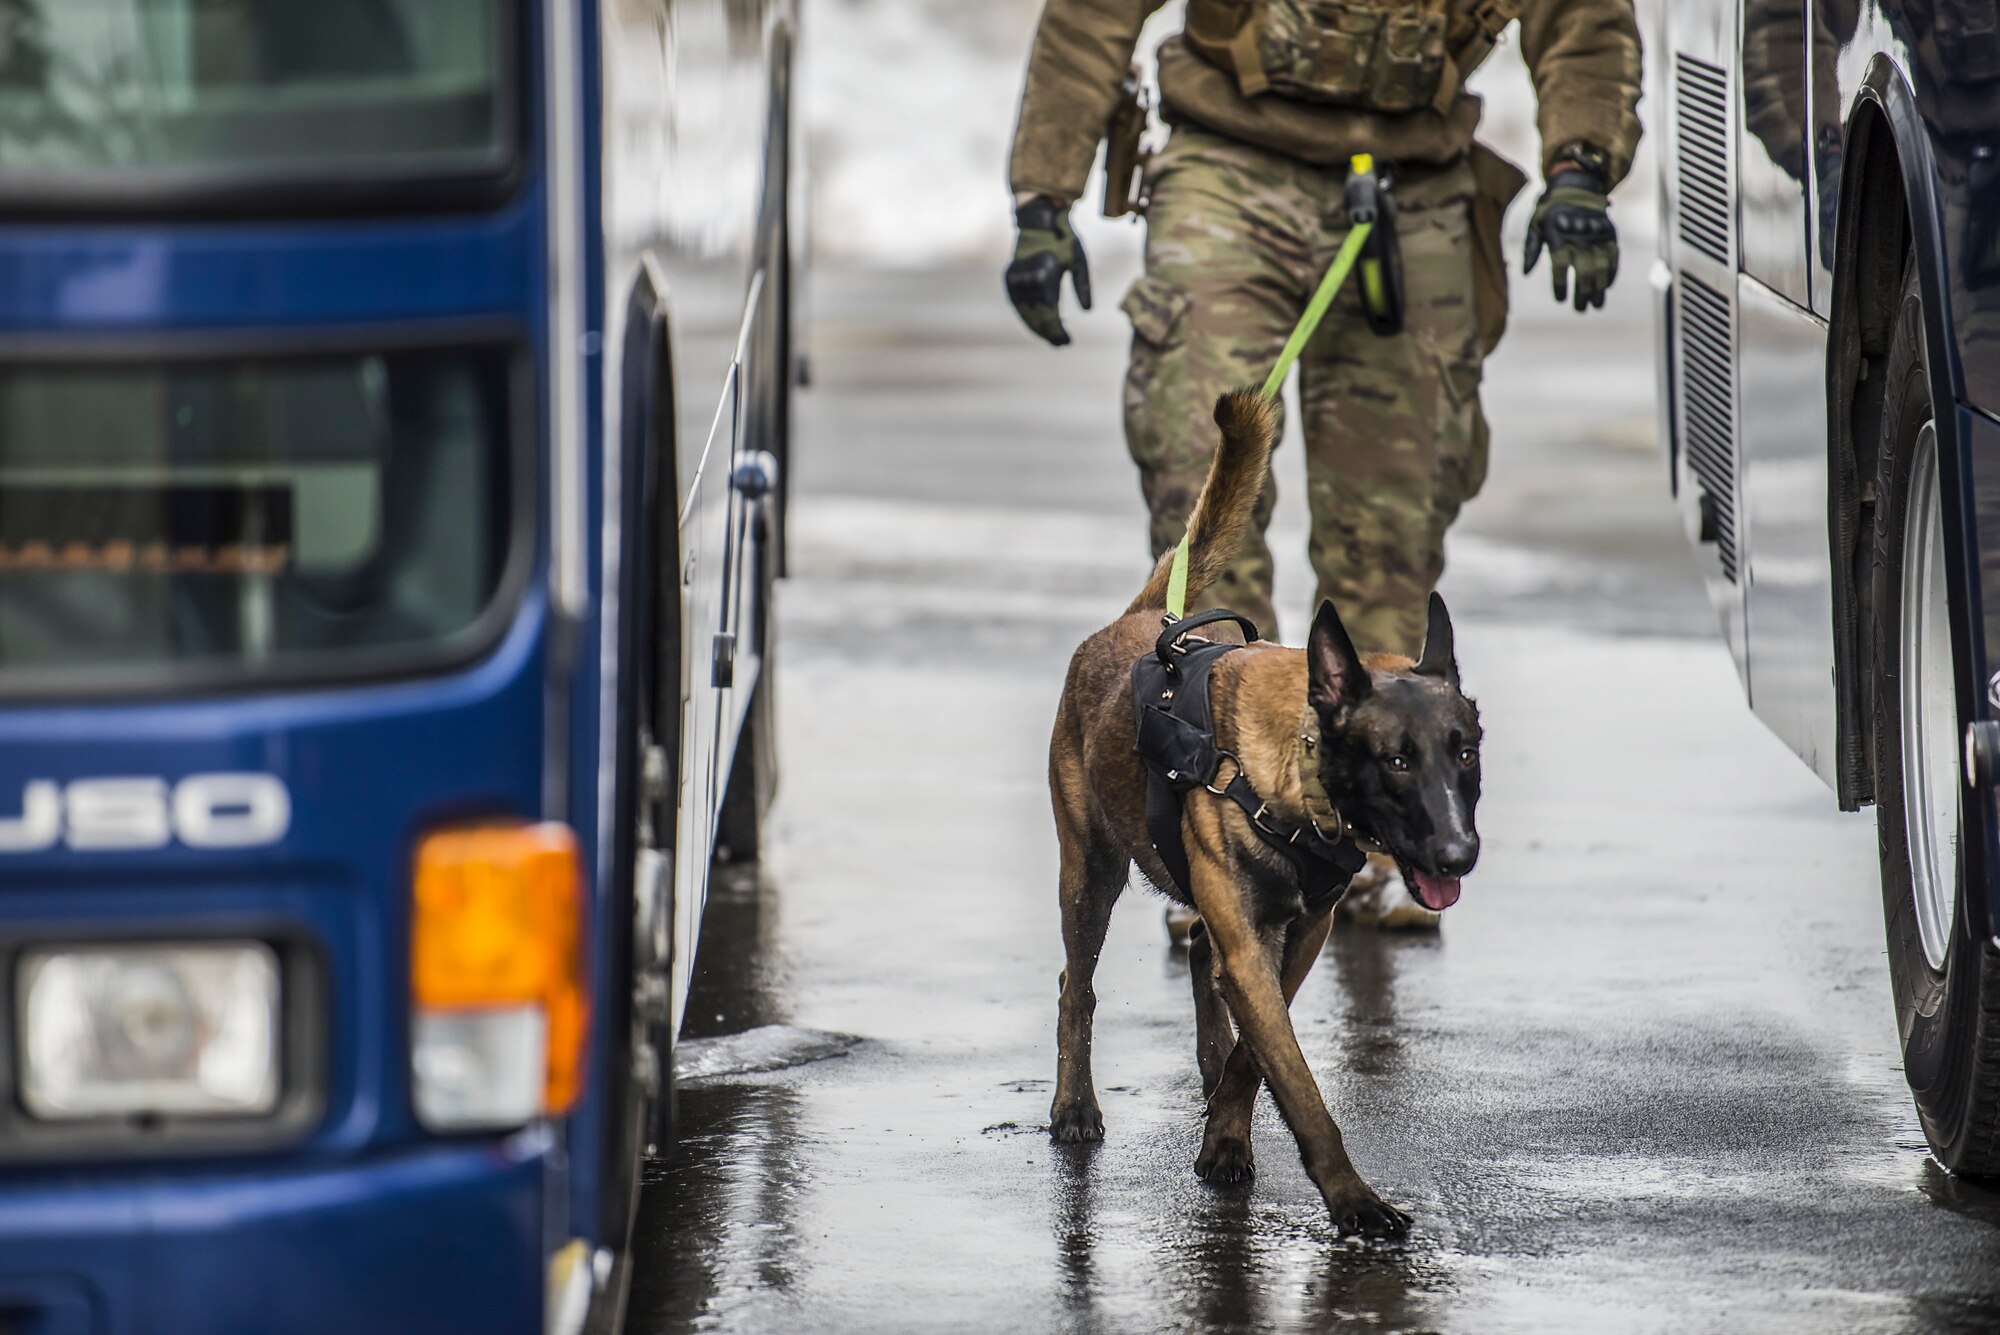 Dog walks towards the camera in between two buses while man in uniform follows behind.